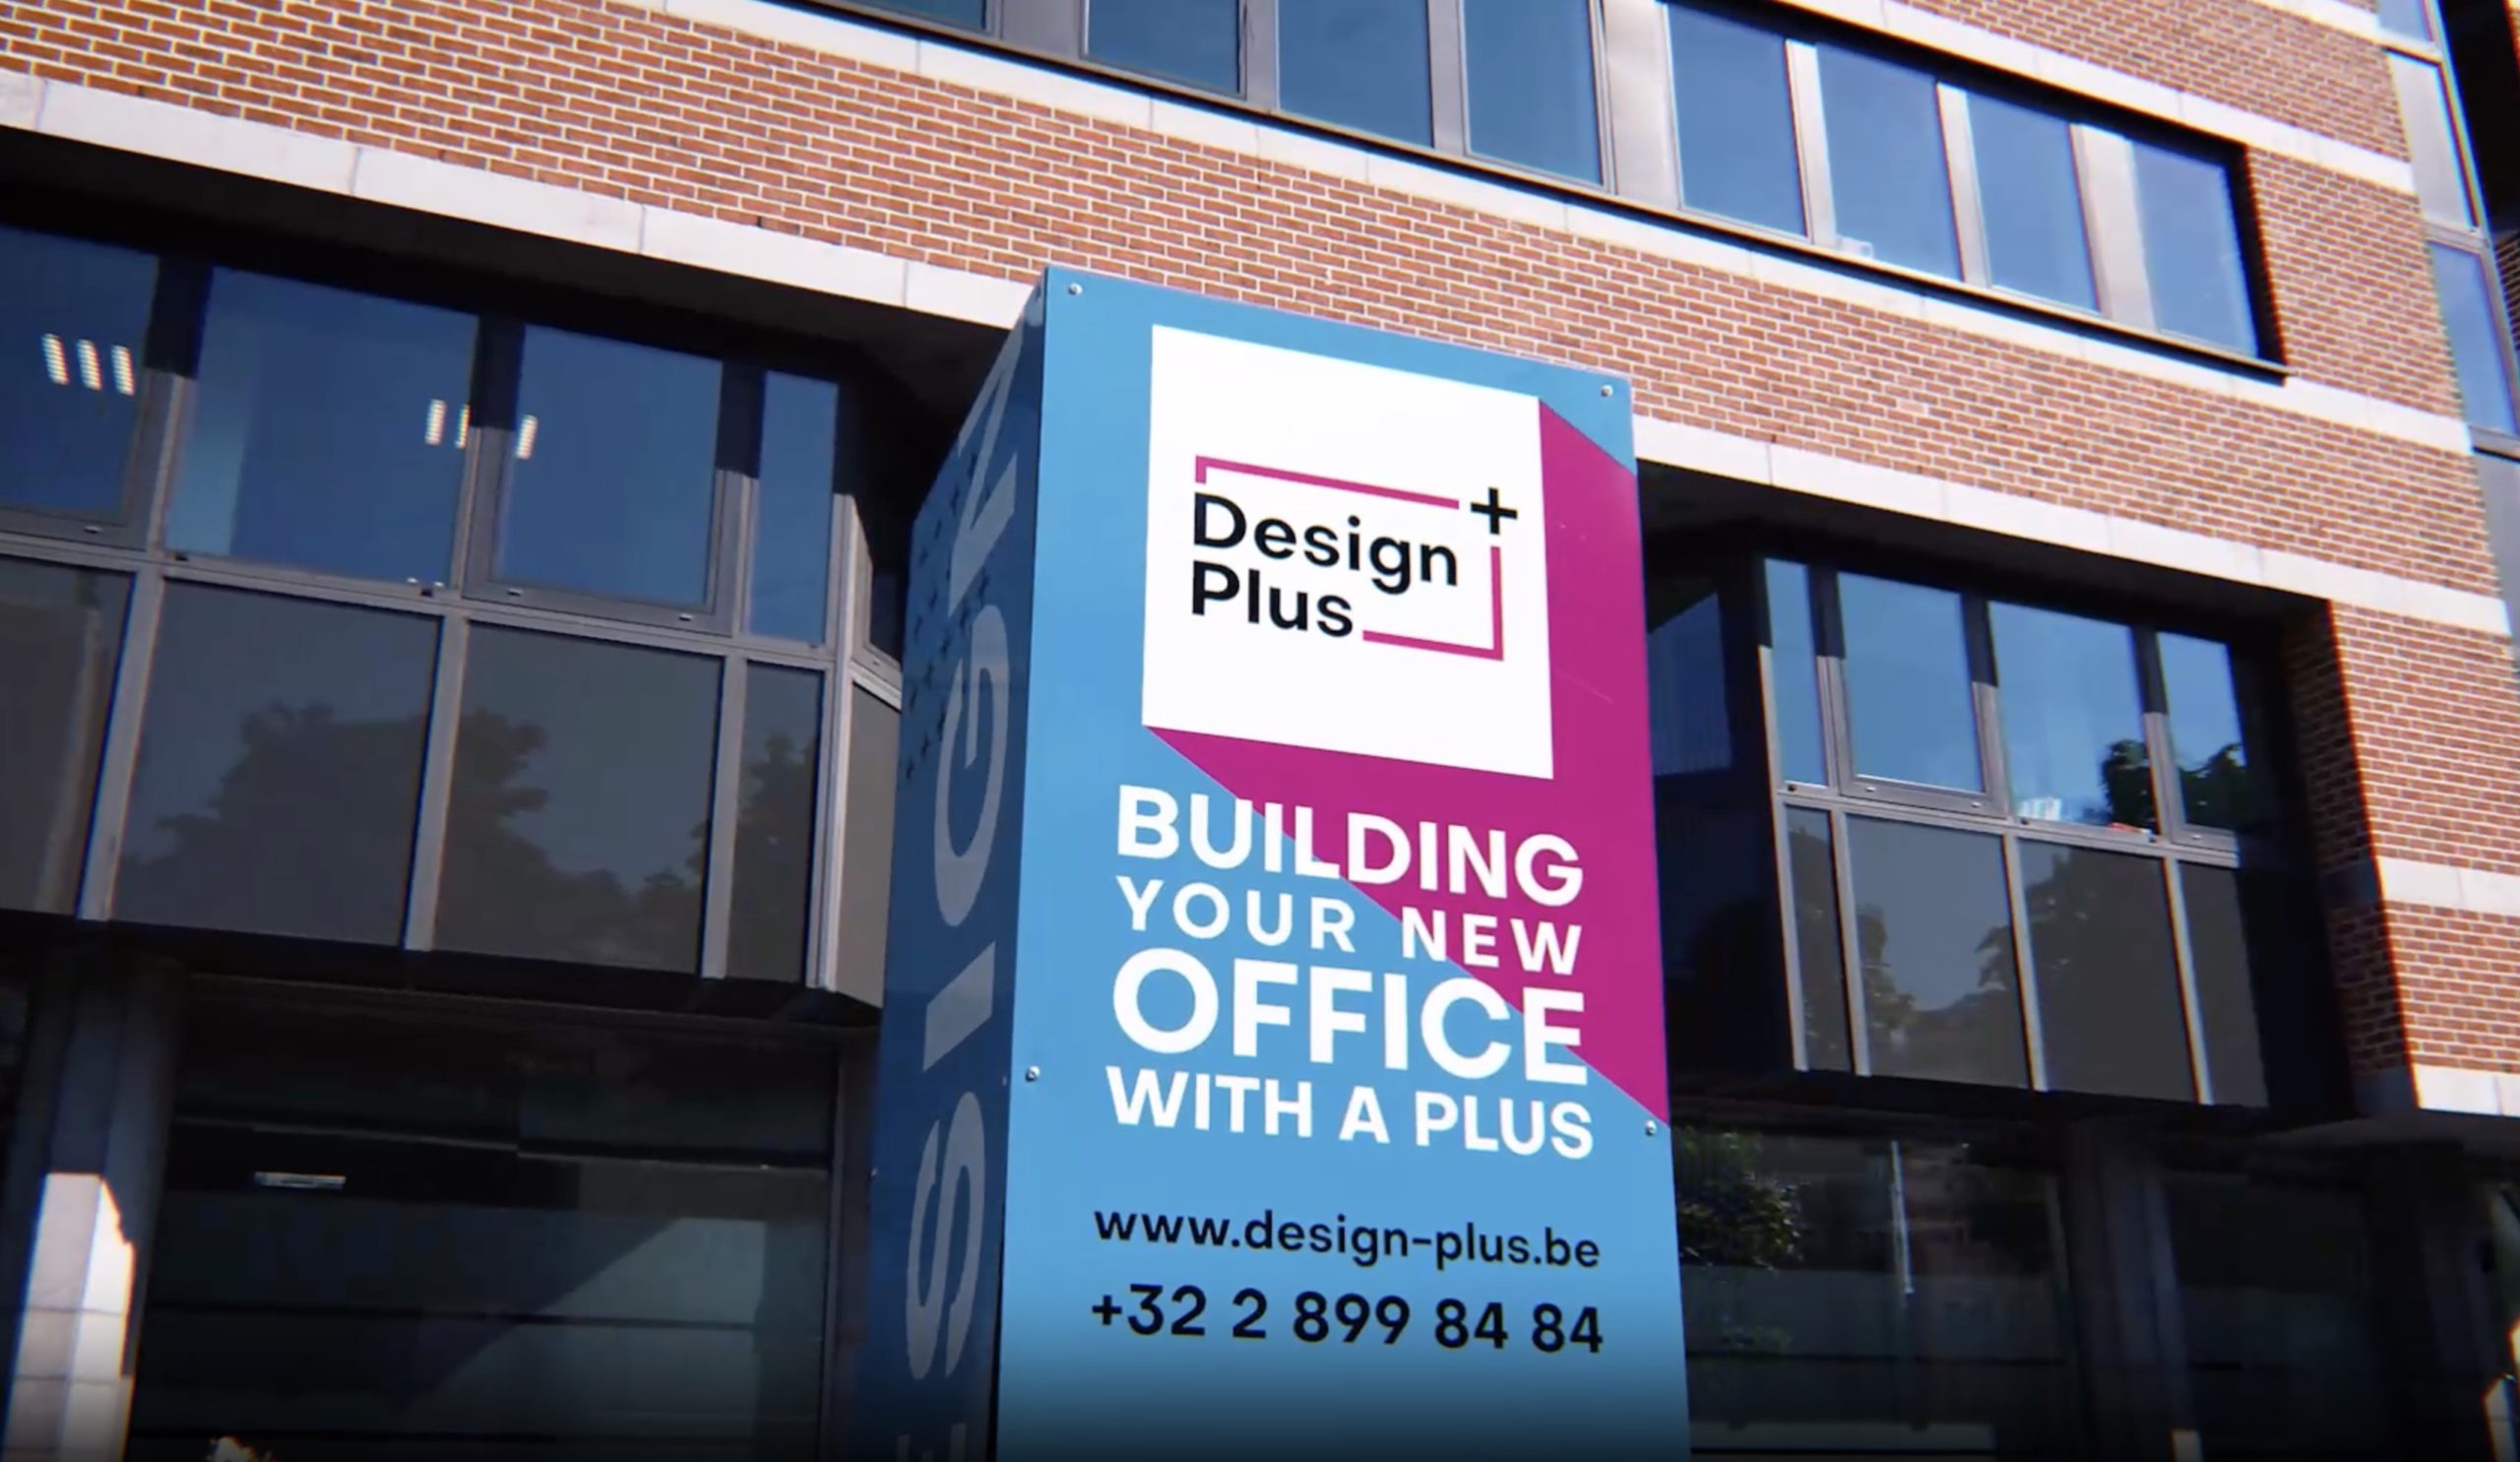 The Design plus team is proud to present its new offices!